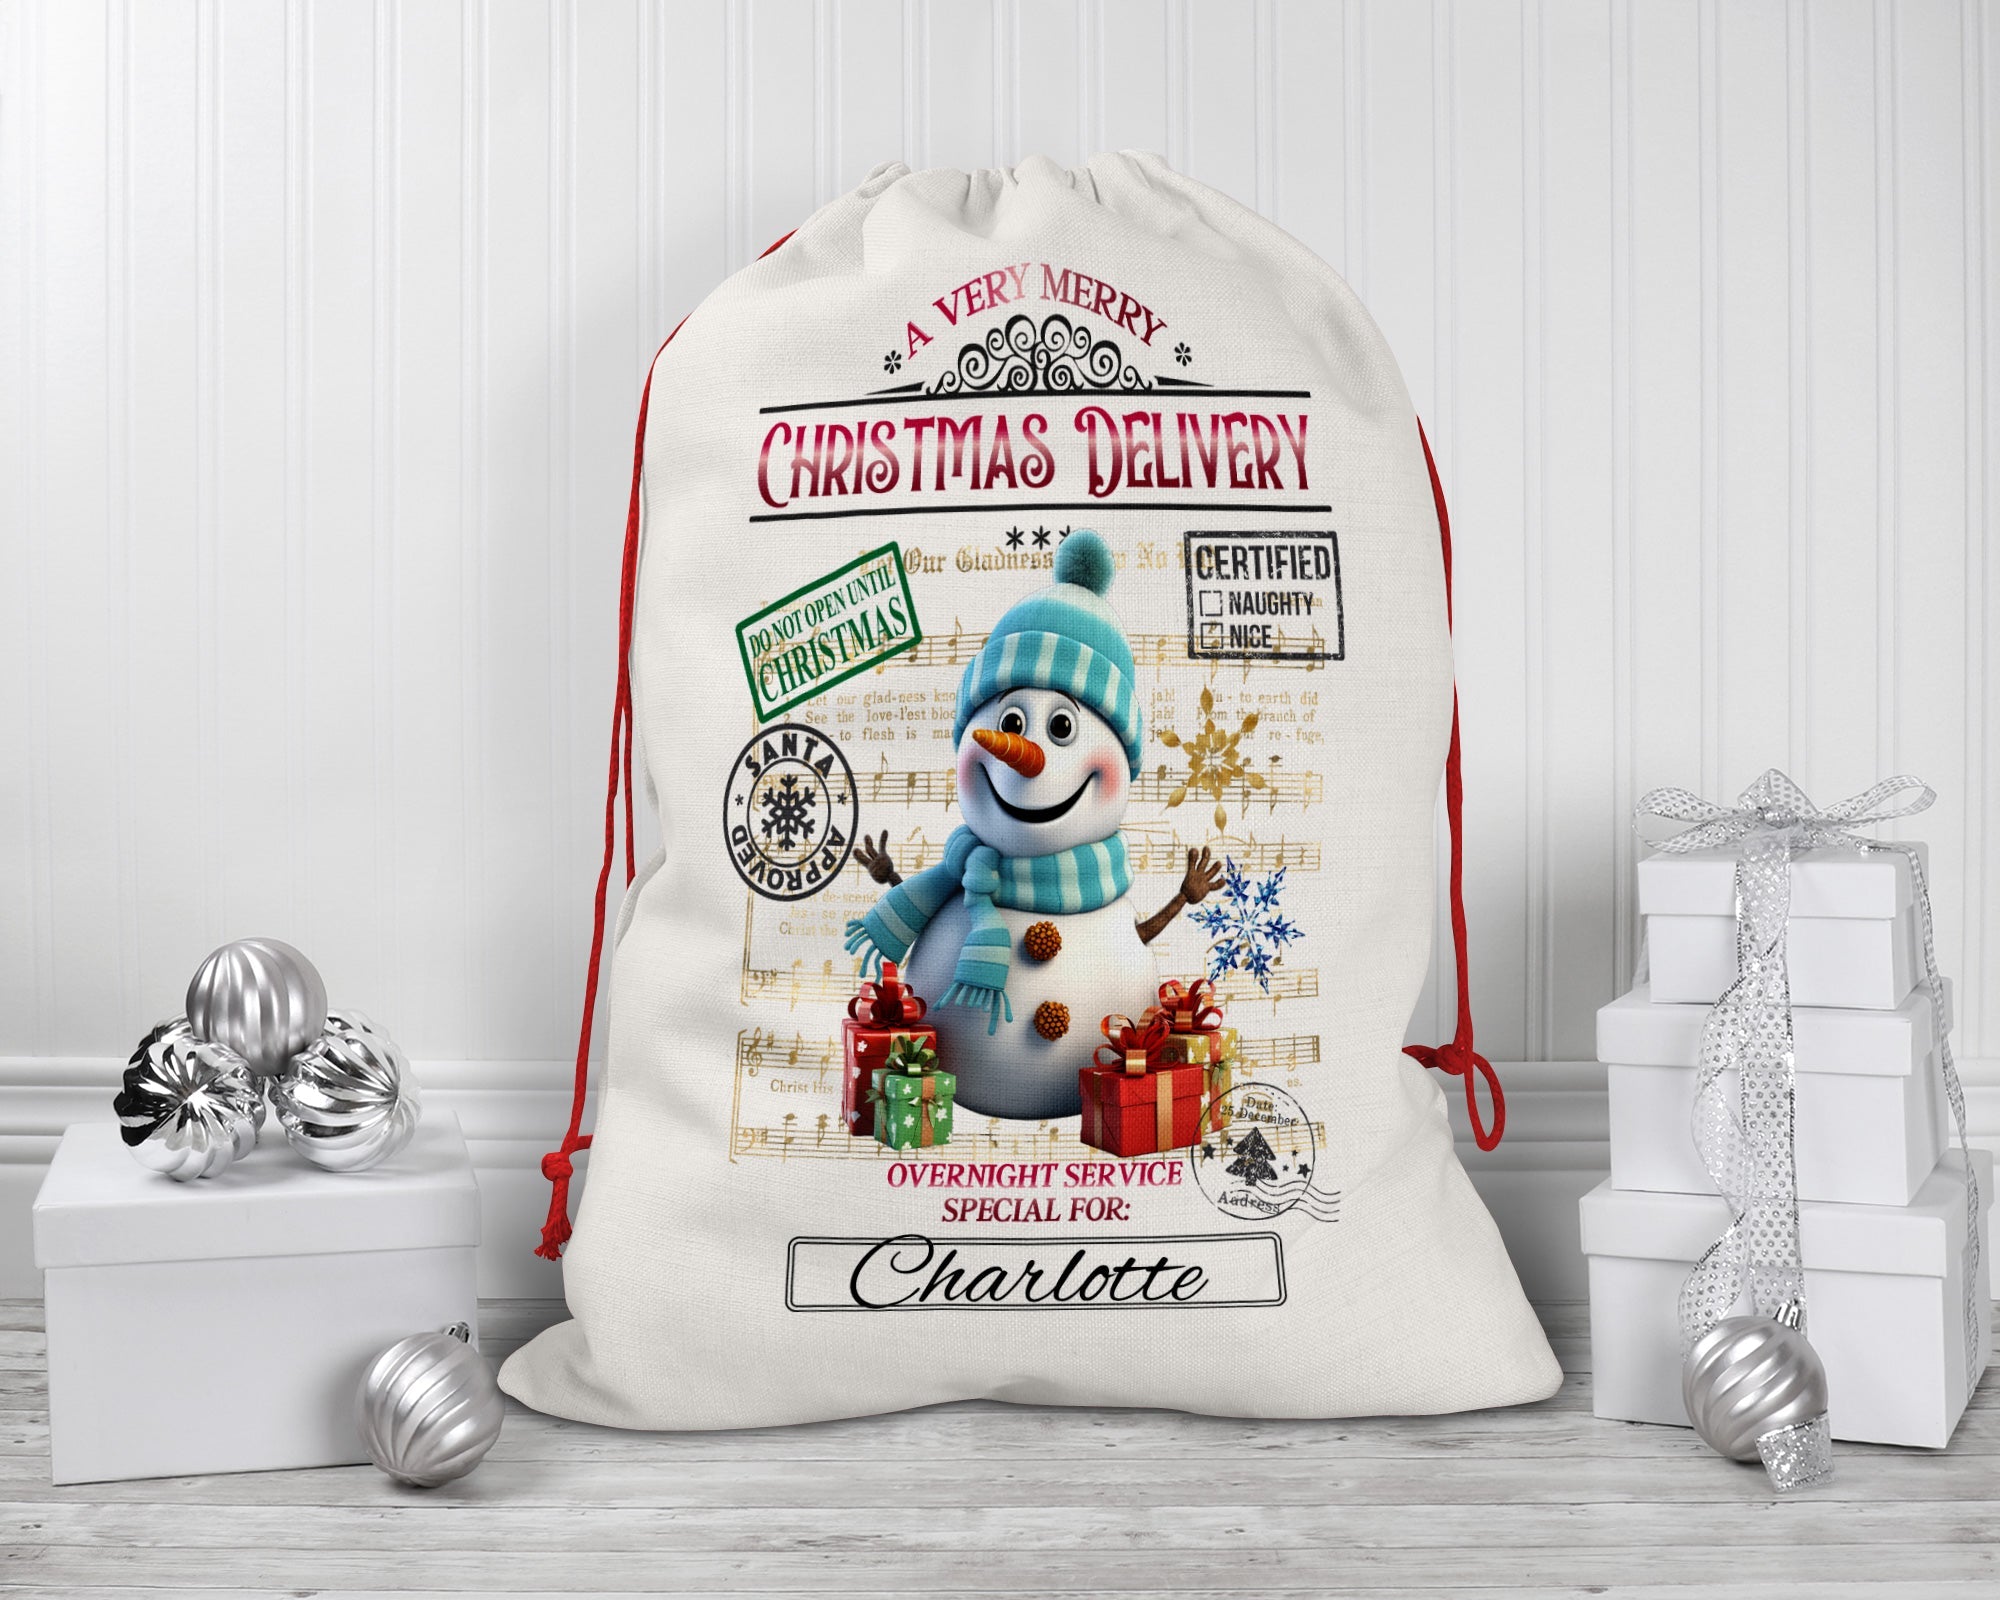 Personalized Santa Sack - Extra Large with Drawstring - Christmas Delivery Snowman